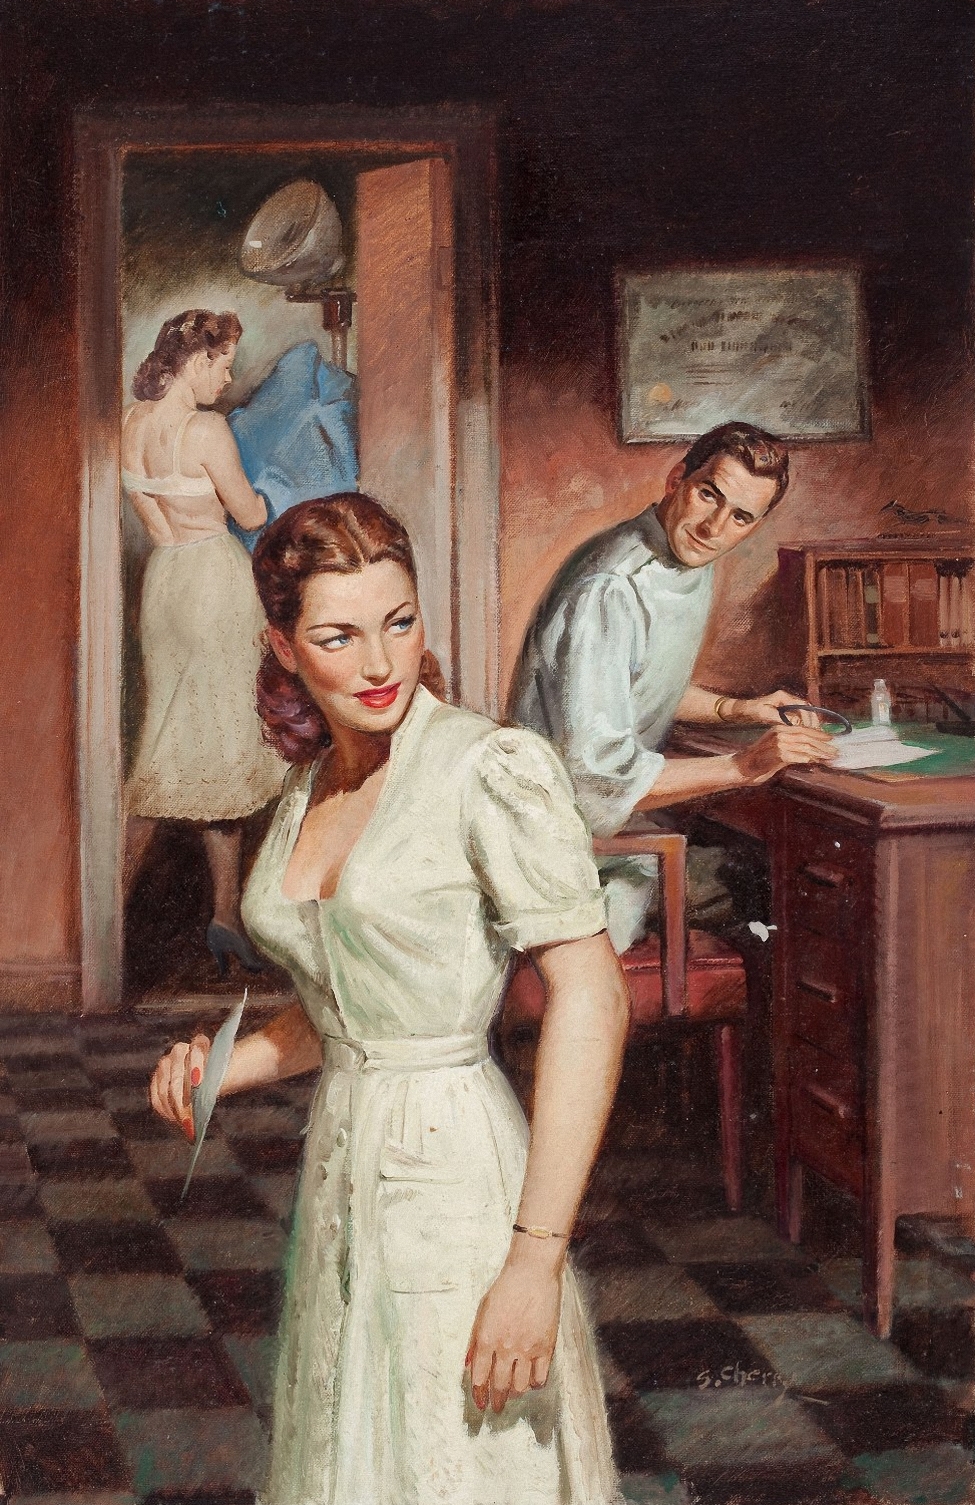 Young Nurse by Sam Cherry, 1954